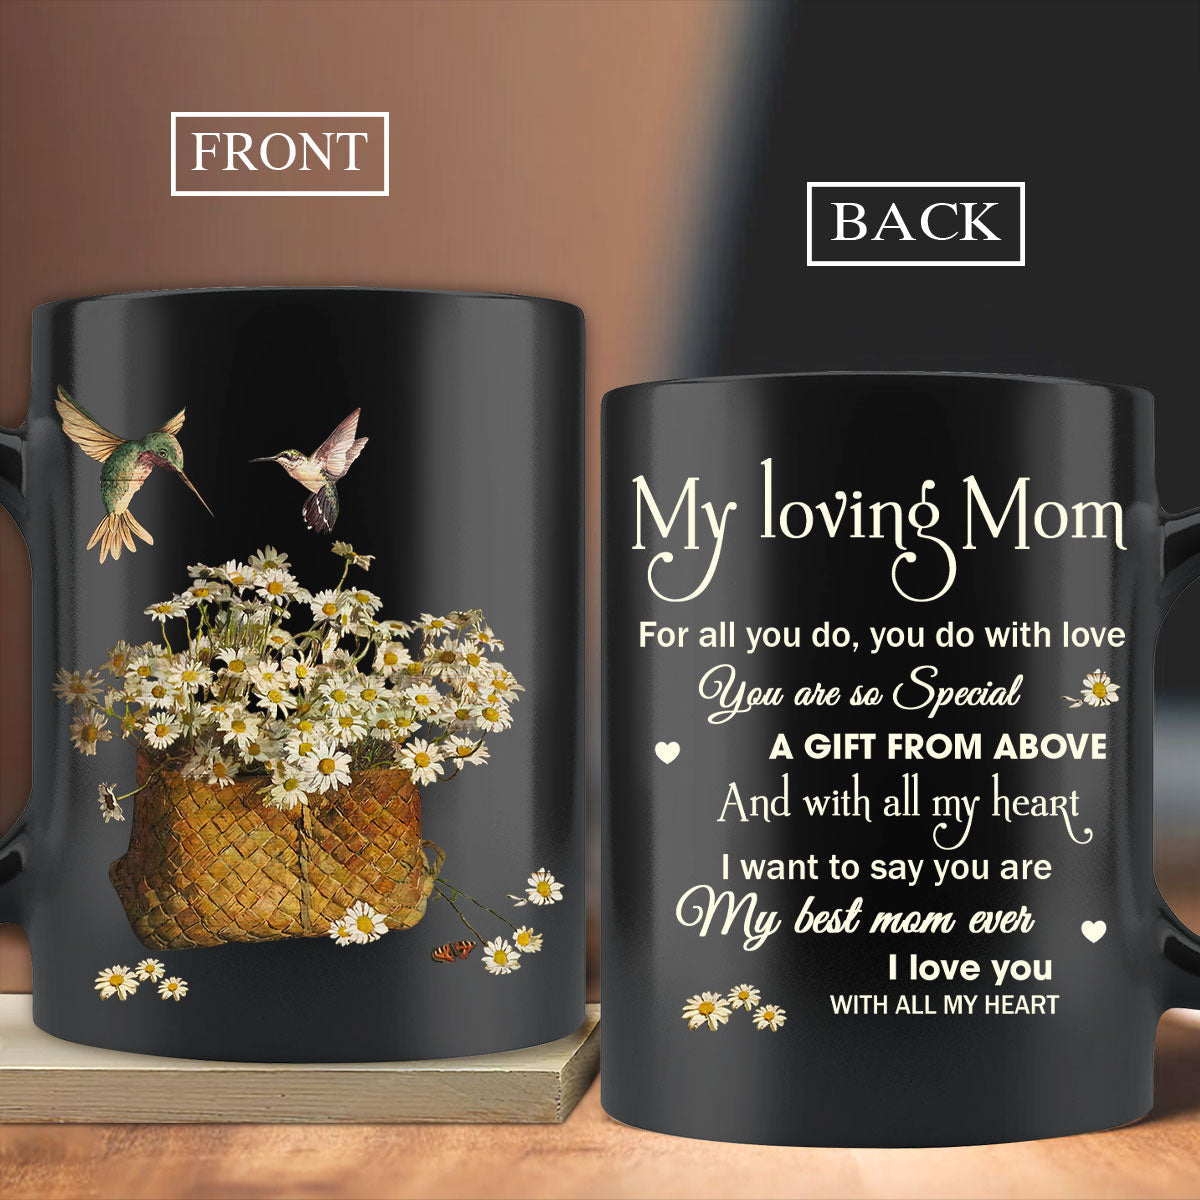 Gift For Mom Mug - To my mom, Daisy flower basket, Vintage painting Mug - Gift For Mother's Day, Presents for Mom - You are a gift from above Mug